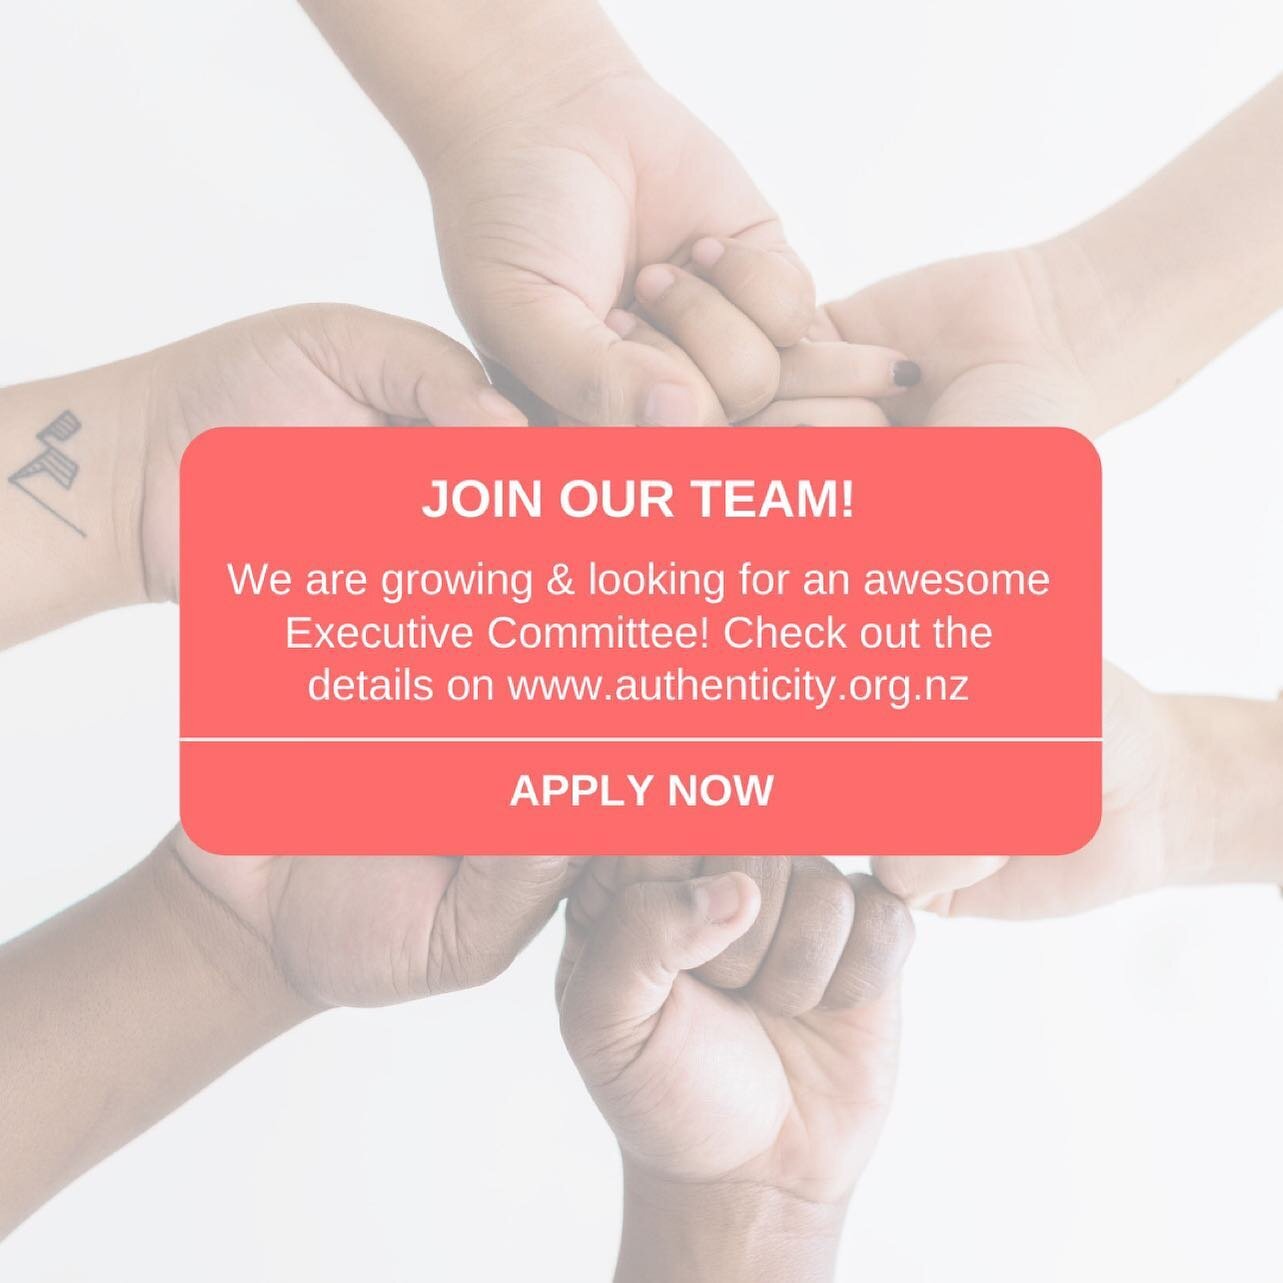 We&rsquo;ve got some exciting news to share this long weekend!! Applications are now open to join our inaugural Exec Team - takes just 2 mins to apply on our website, link in bio ☝🏽